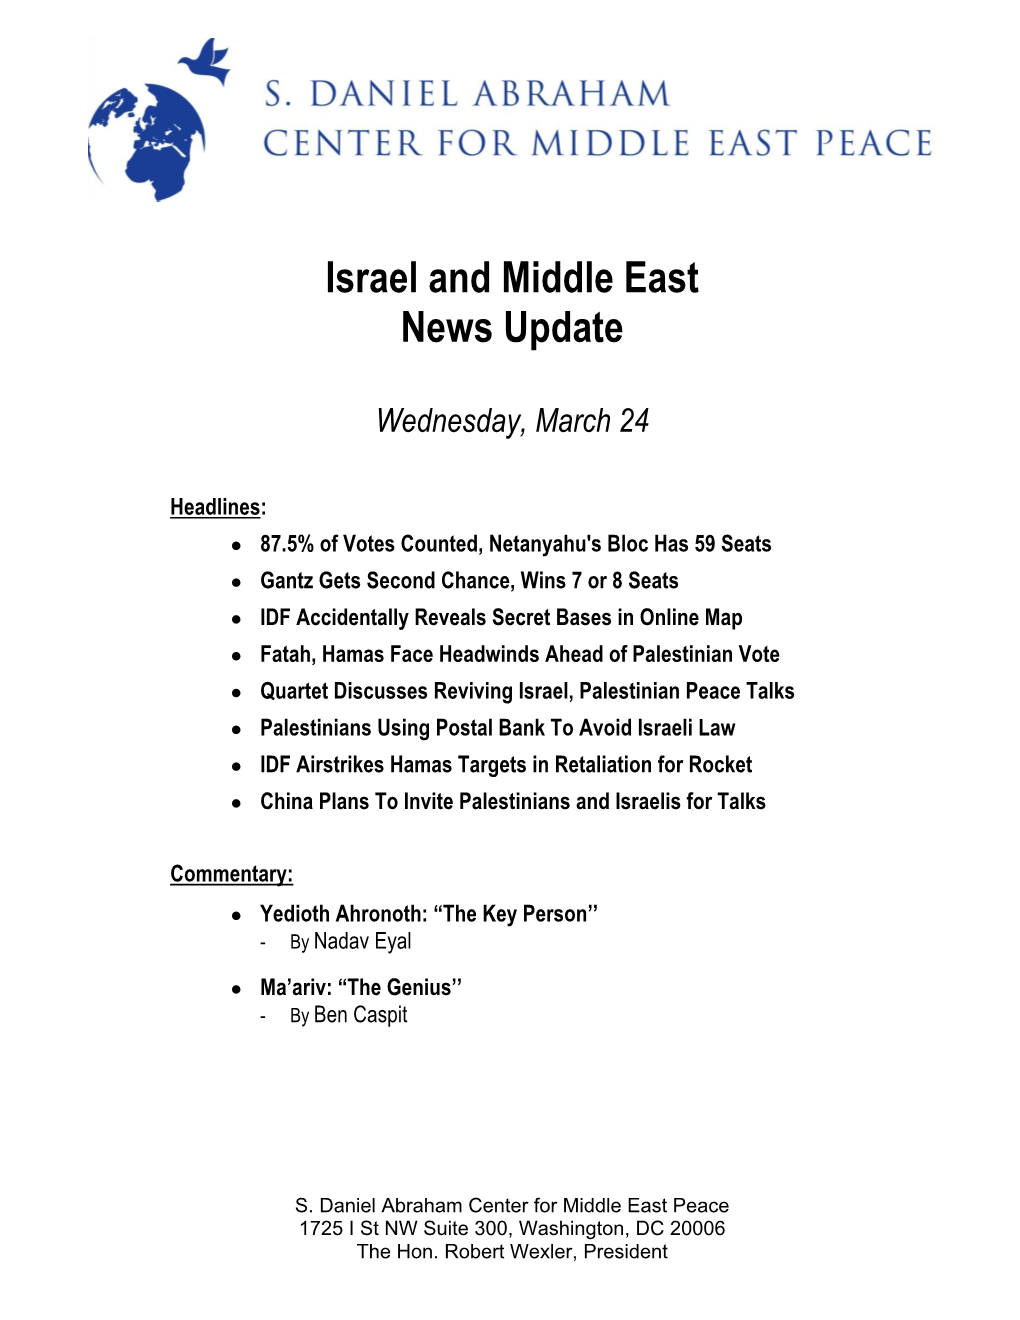 Israel and Middle East News Update